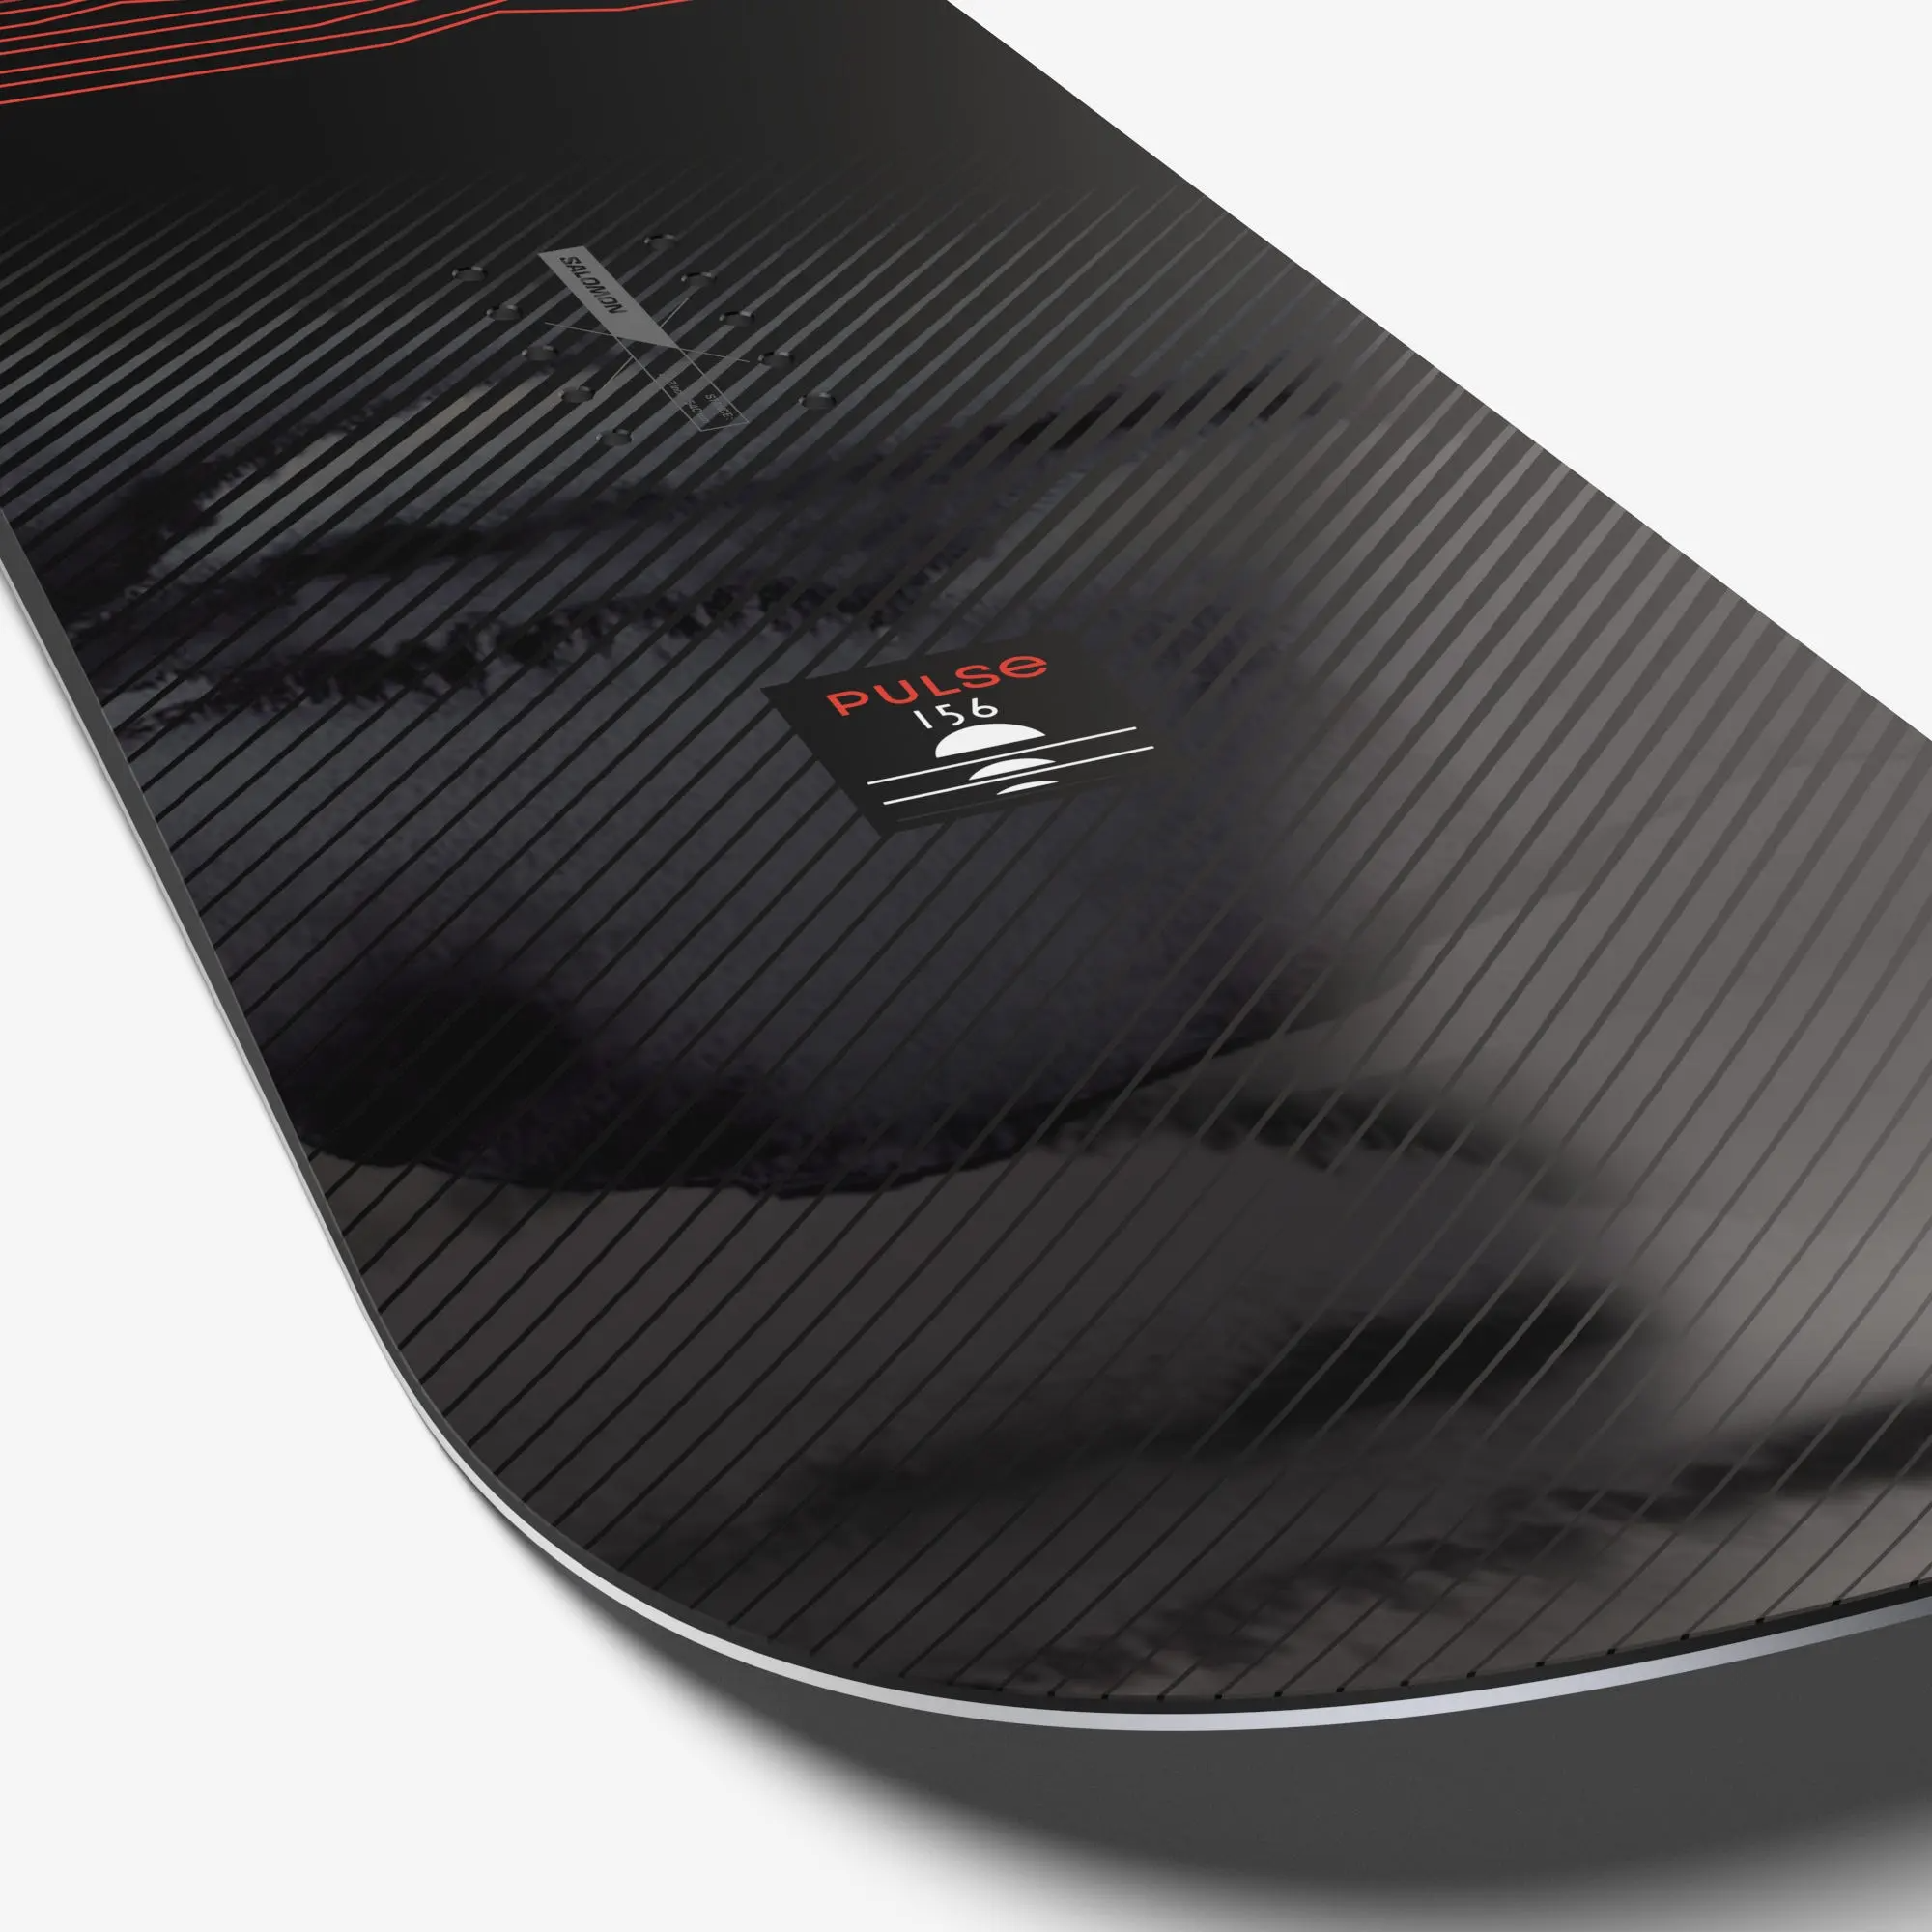 The Pulse snowboard features a soft flex and a forgiving profile, facilitating progression and lowering consequences for beginners. This versatile, directional twin features Bite Free Edges and Flat Out Camber for a catch free ride.